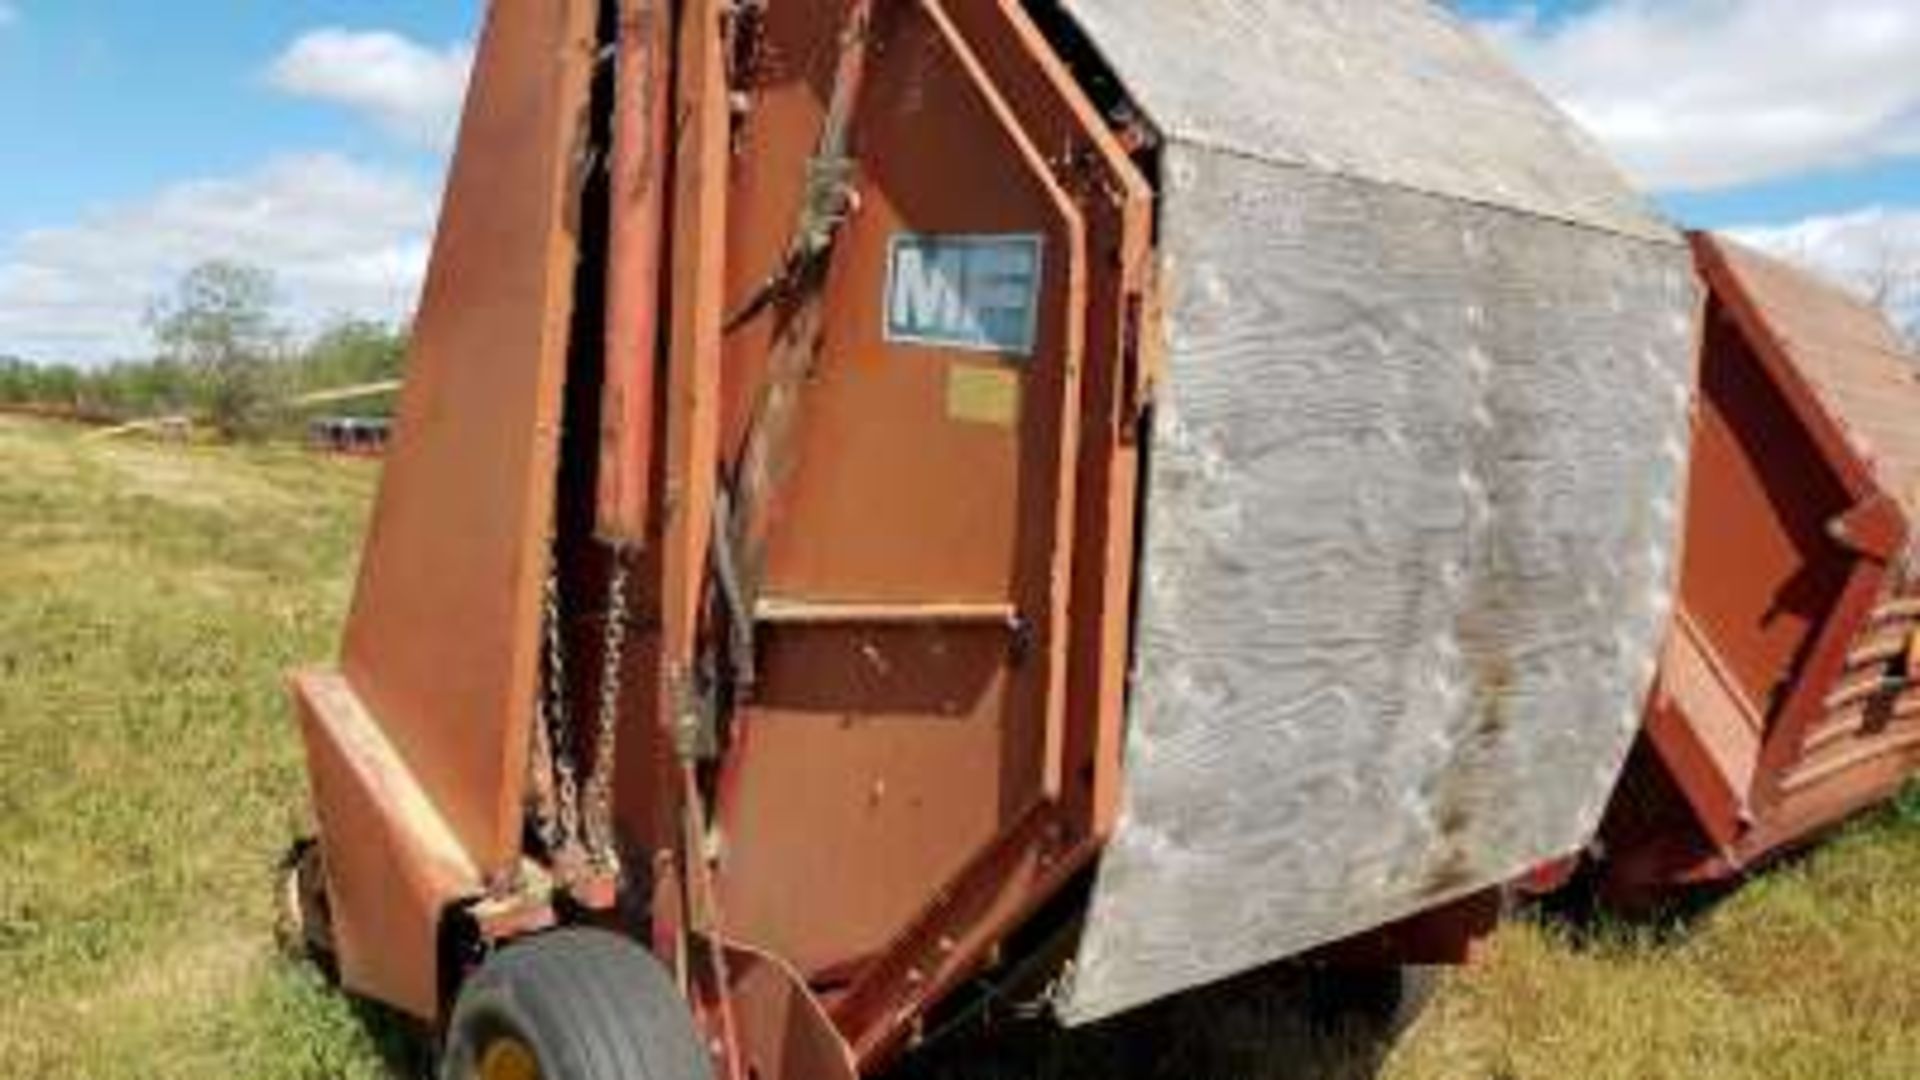 MF 560 Round Baler, homemade protective shell covers the belts in storage. - Image 2 of 3